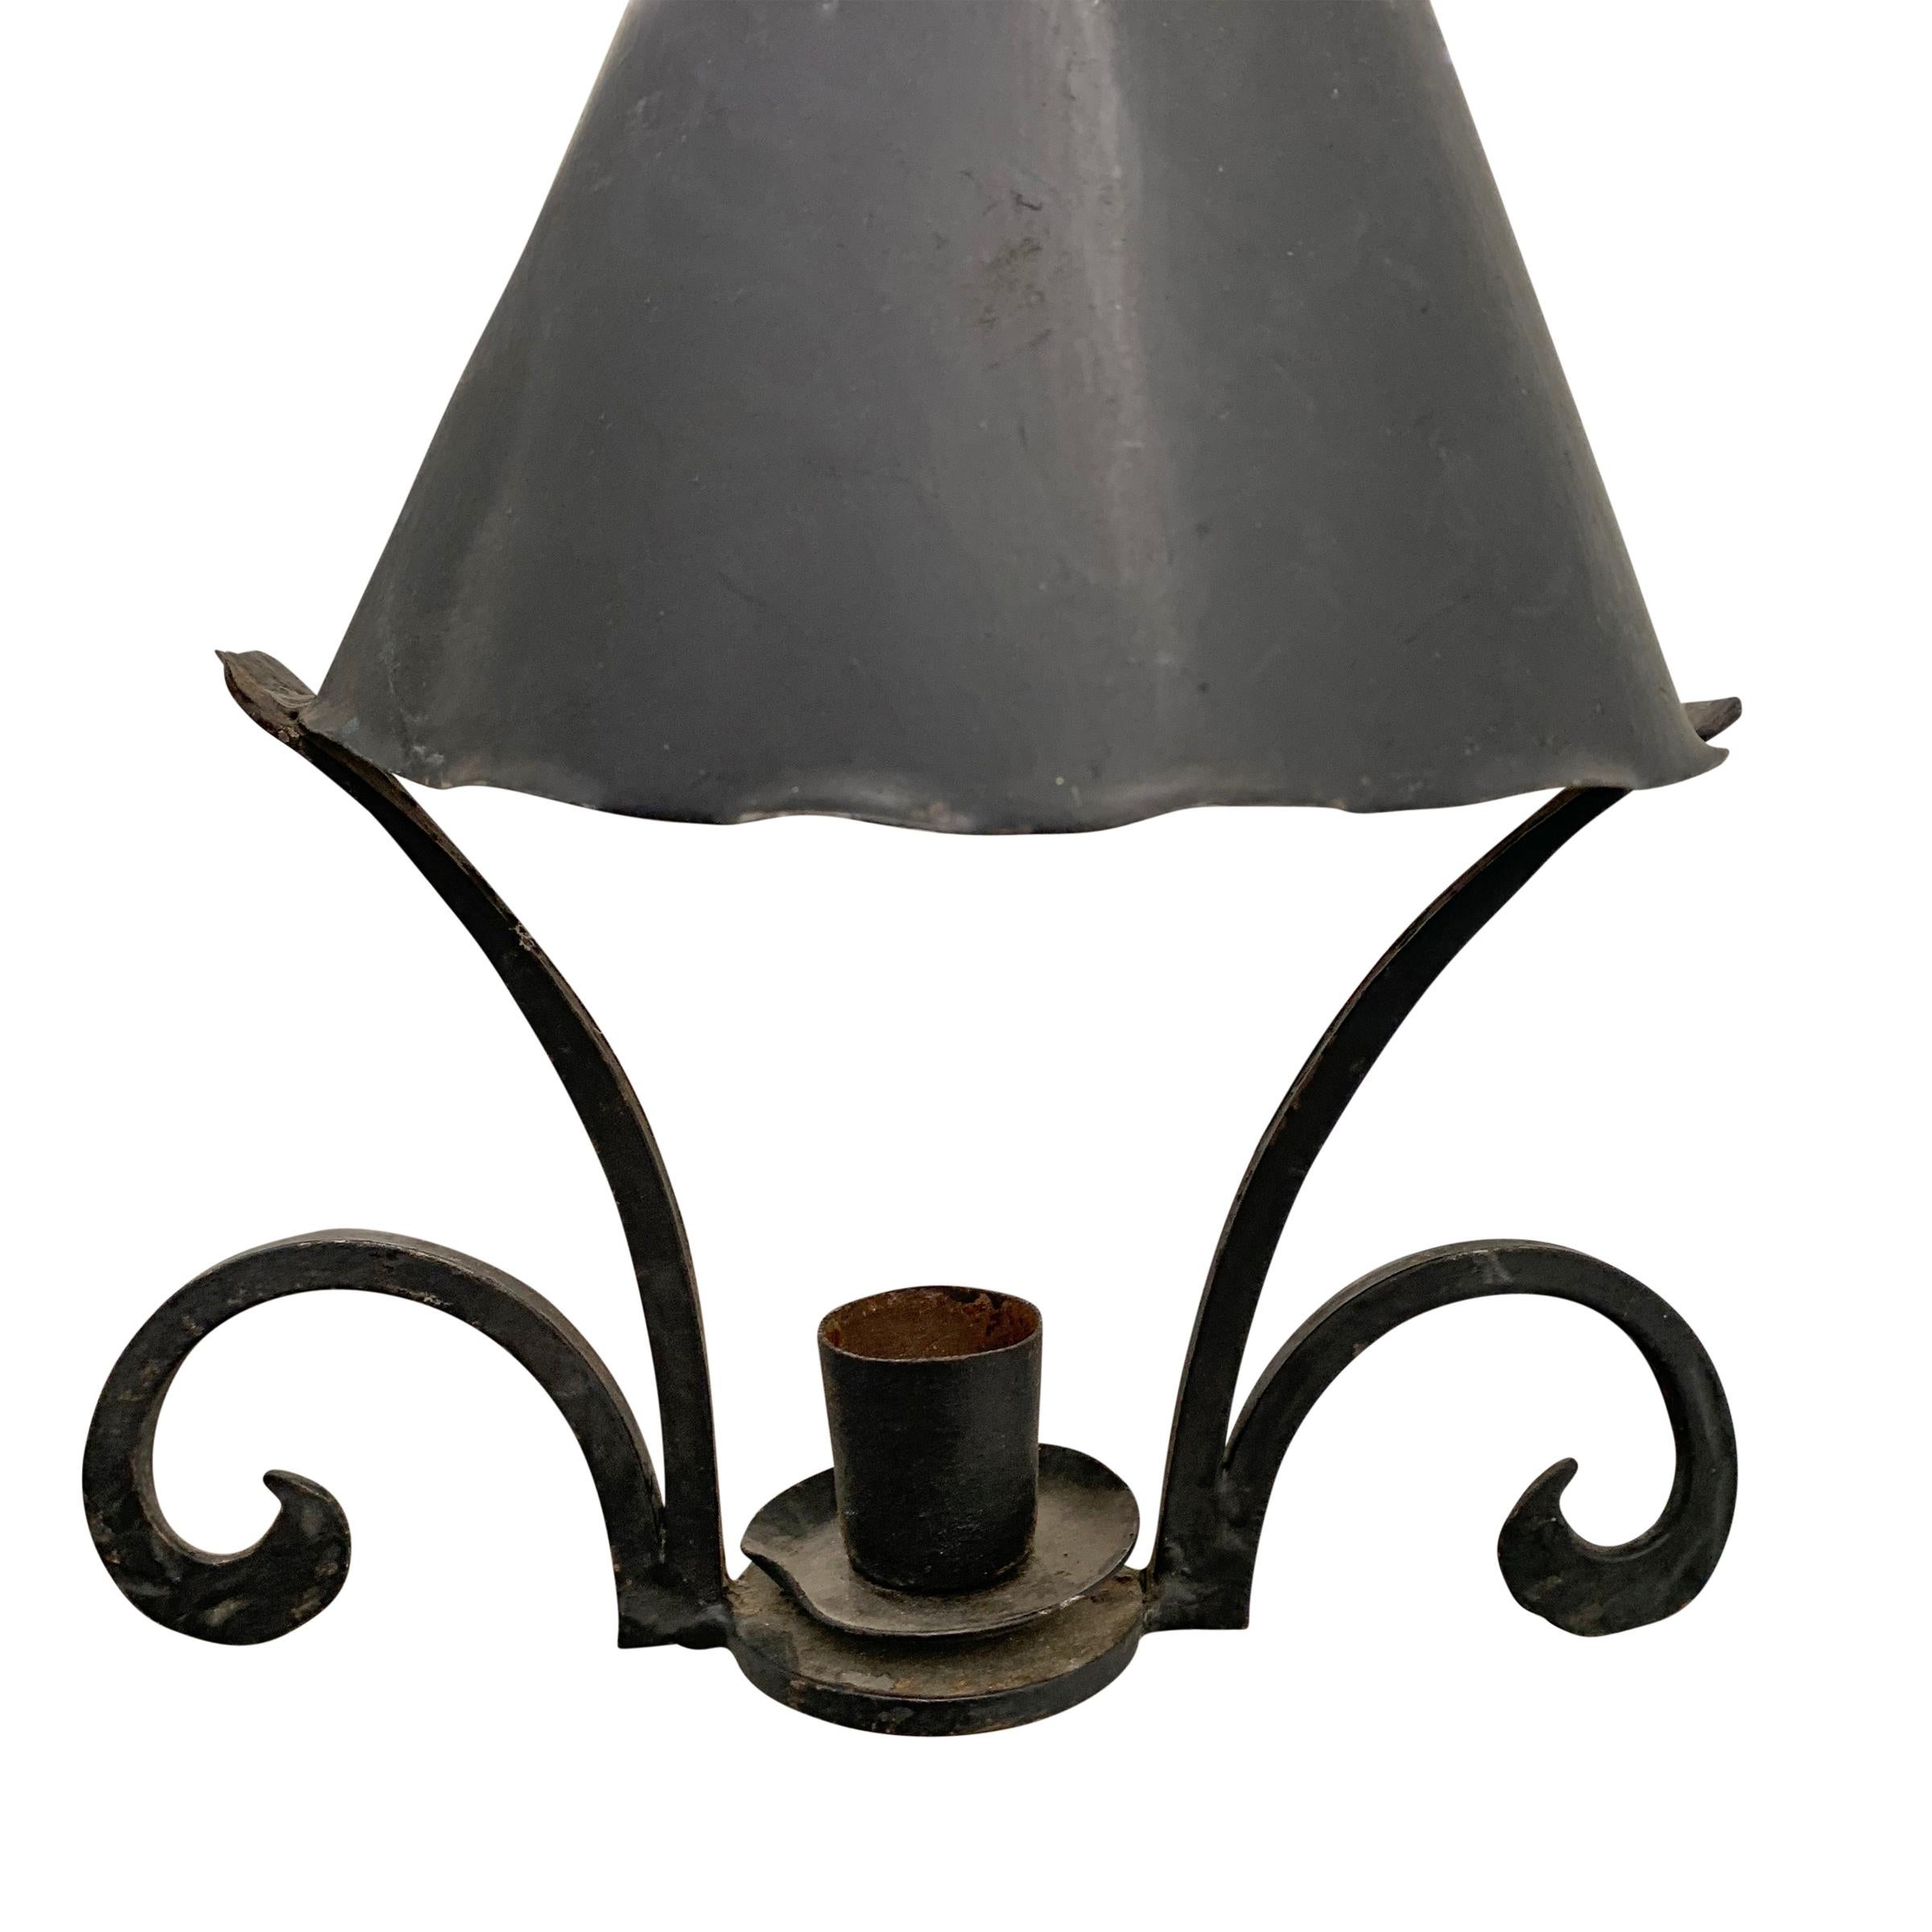 Rustic Early 20th Century American Iron Light Fixture